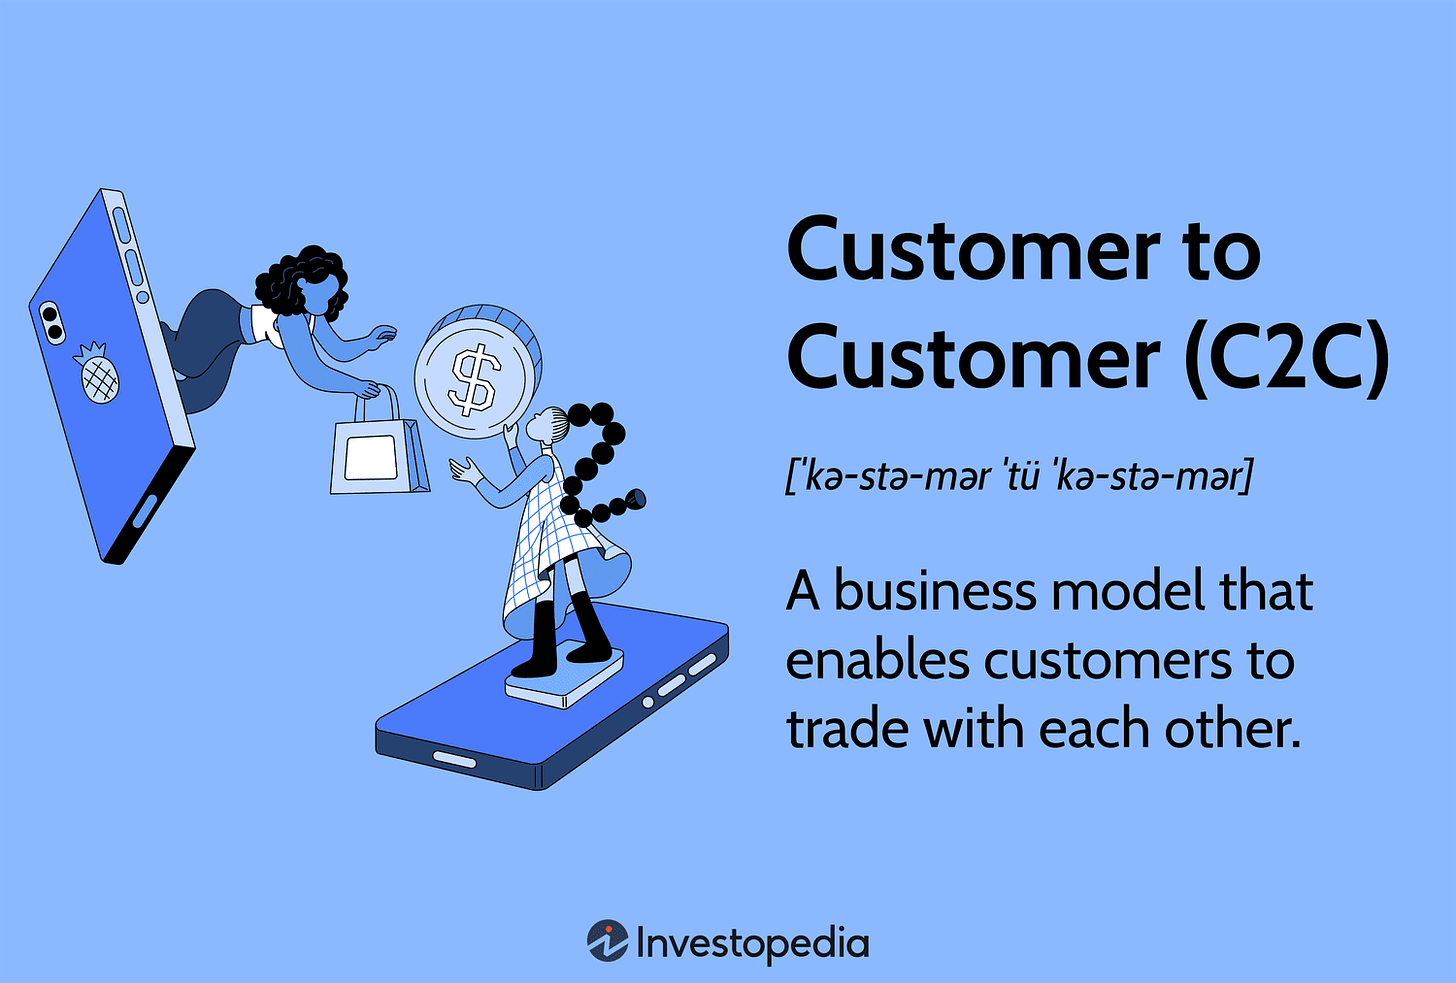 What Is C2C? How Does the Customer-to-Customer Model Work?